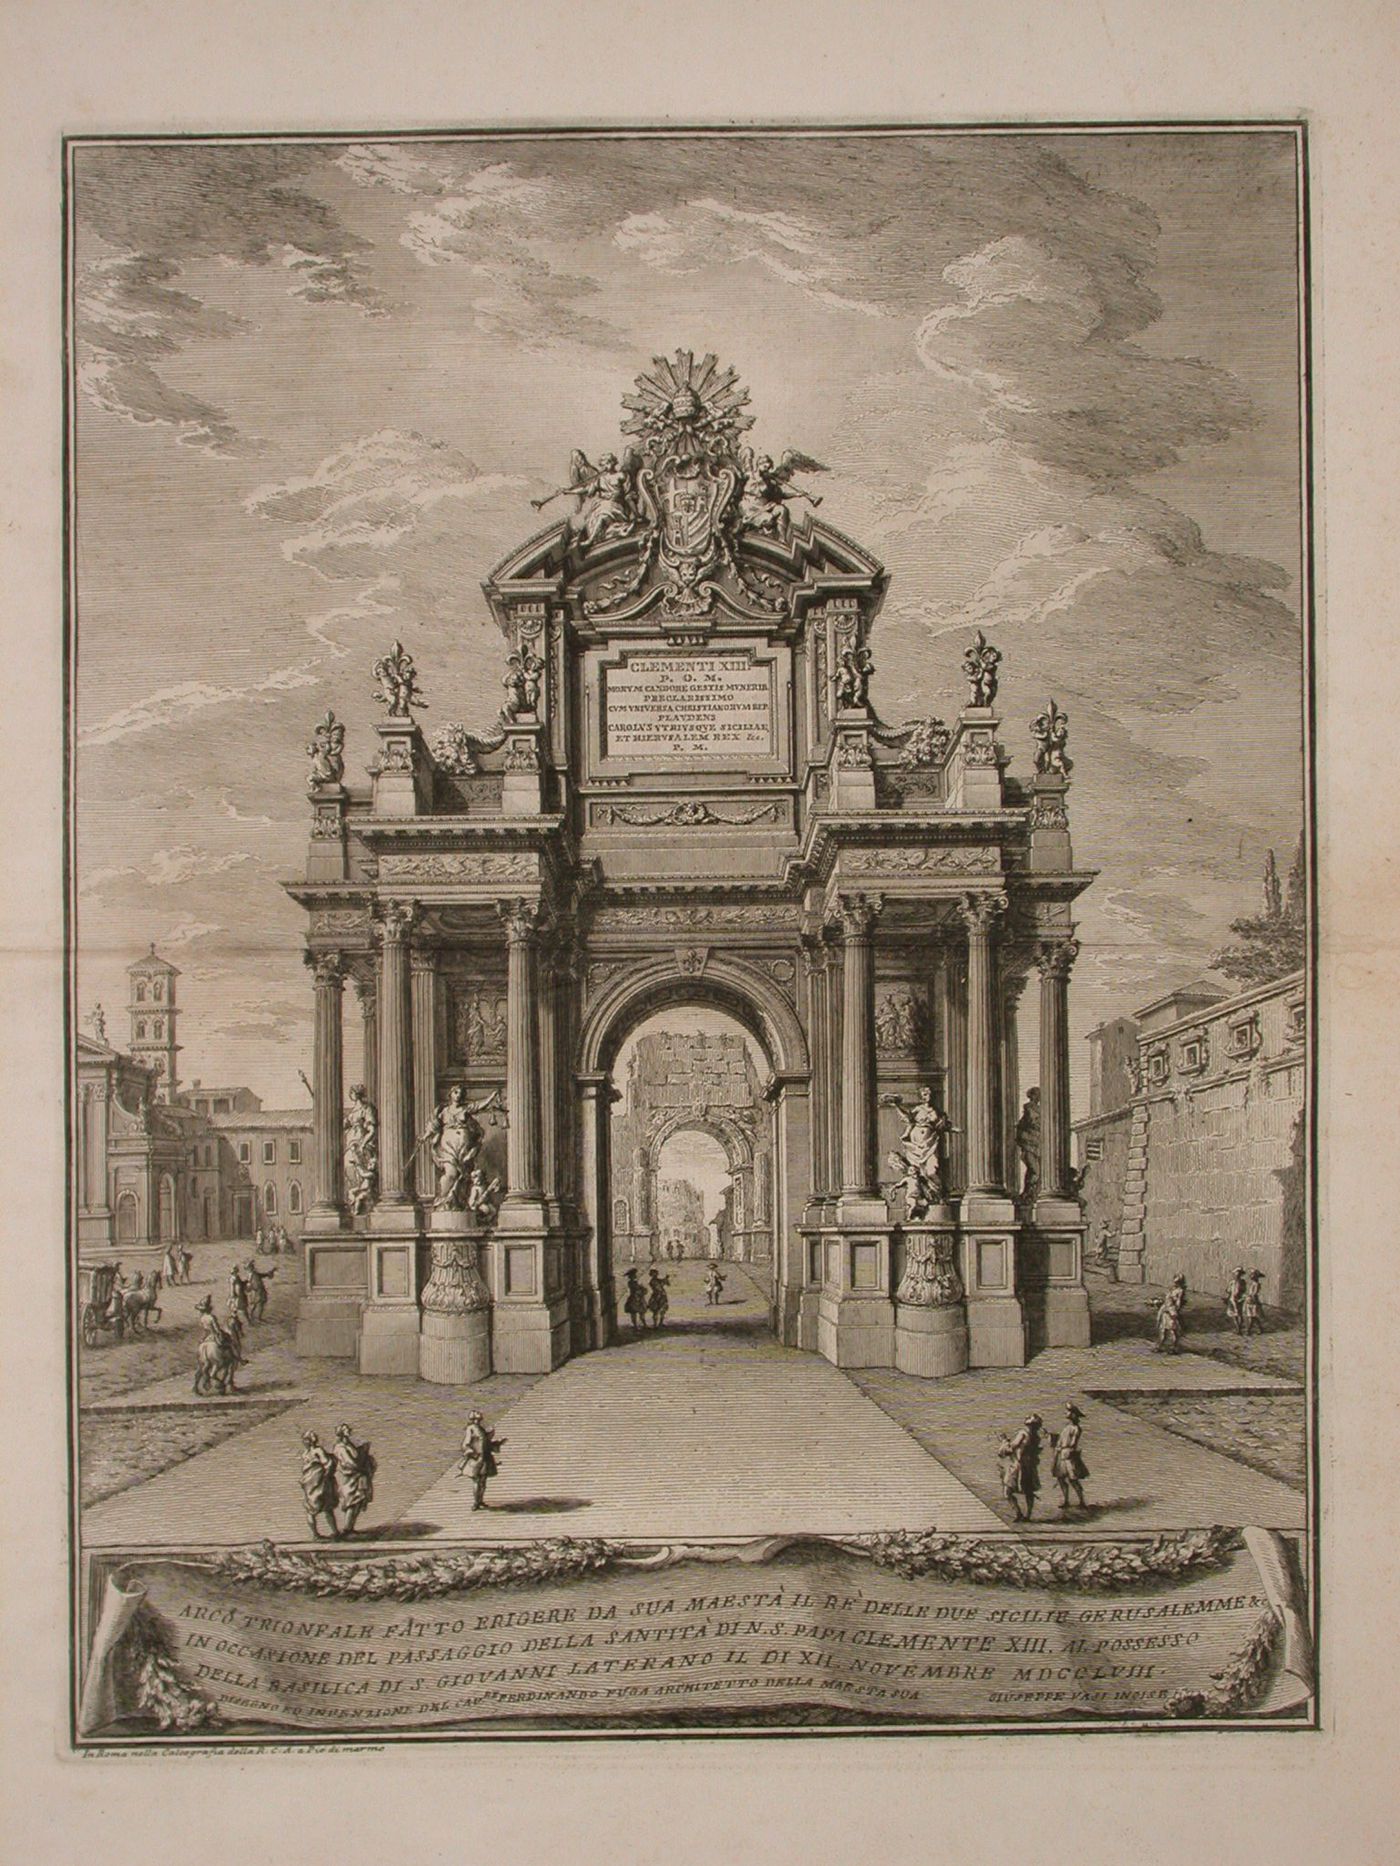 Triumphal Arch erected by the King of Sicily in honour of Pope Clement XIII, Rome